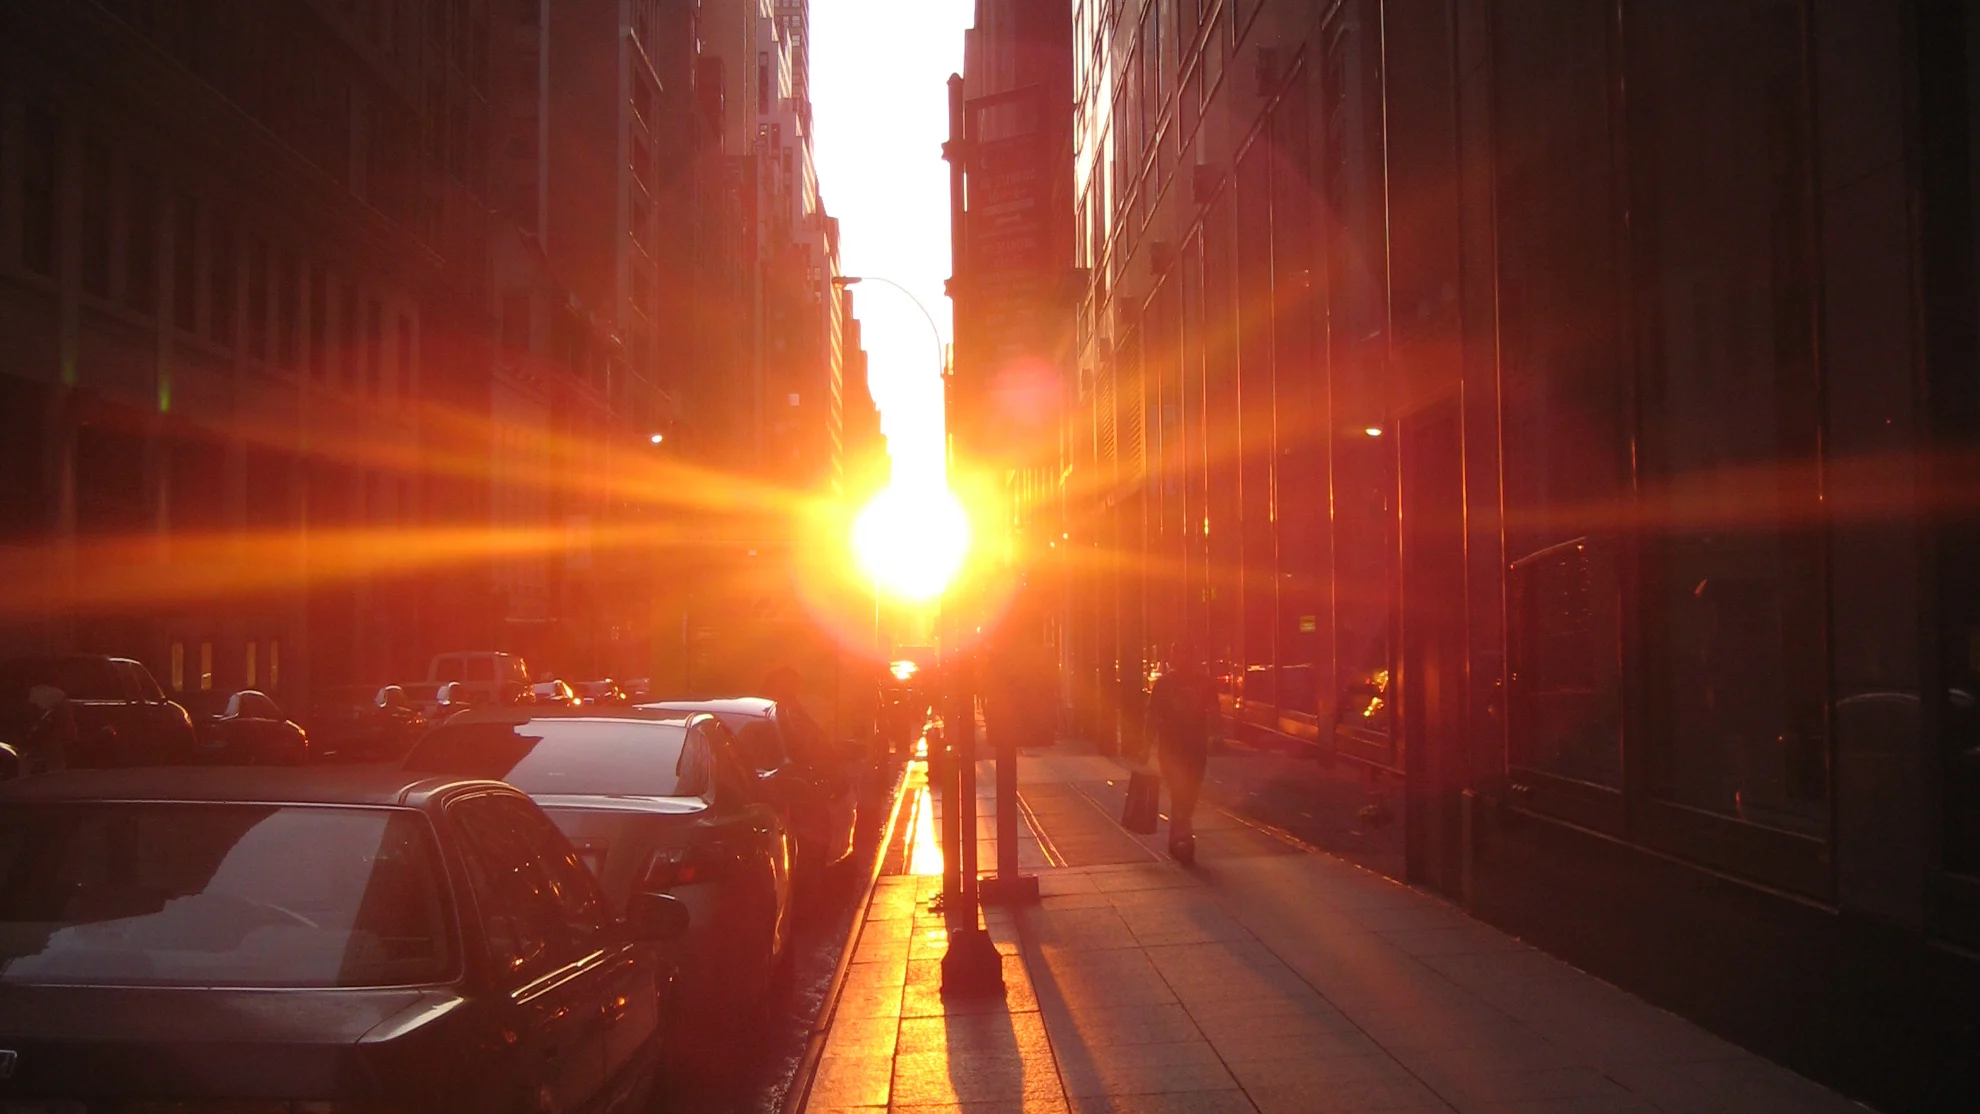 Cloudy skies obscuring Torontohenge? Here's when you can see it